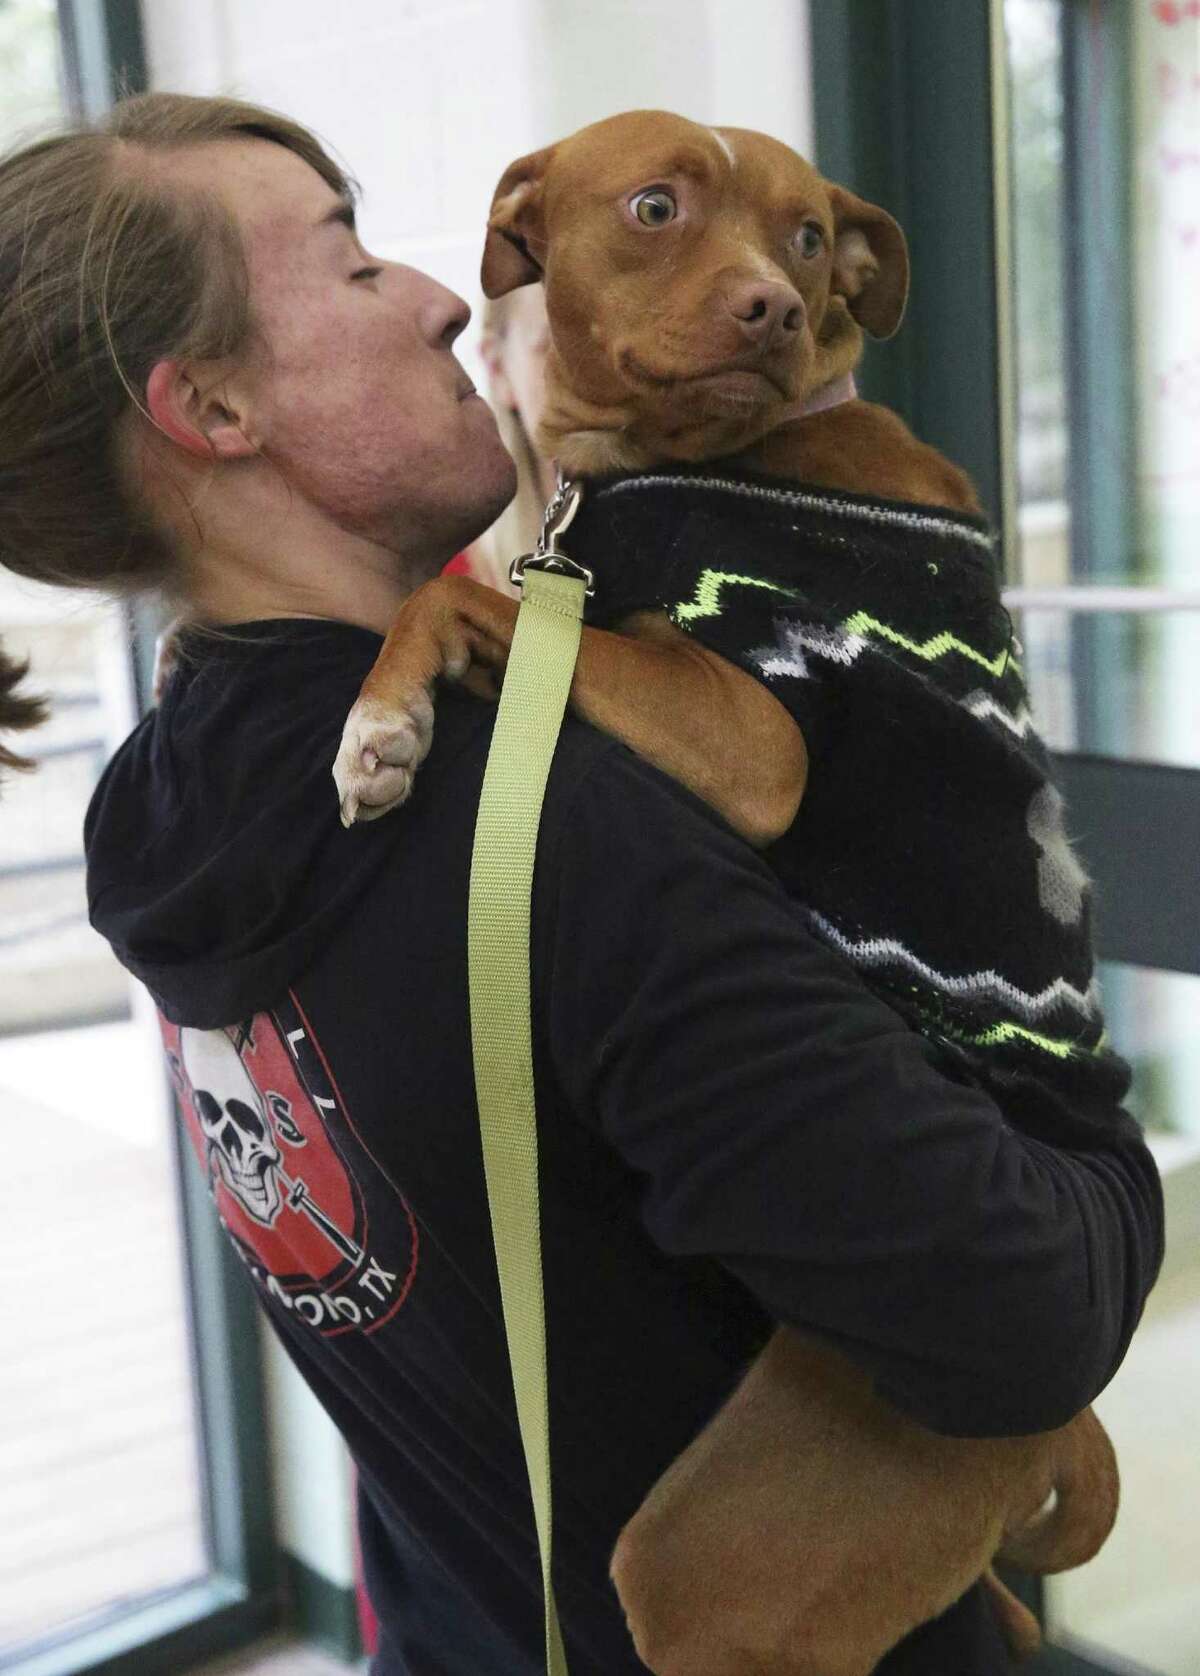 Brittany Rucker gets an arm load of Buster after animal care workers assured that he liked to be carried by visitors at the Paul Jolly Center for pet adoption on January 4, 2016.